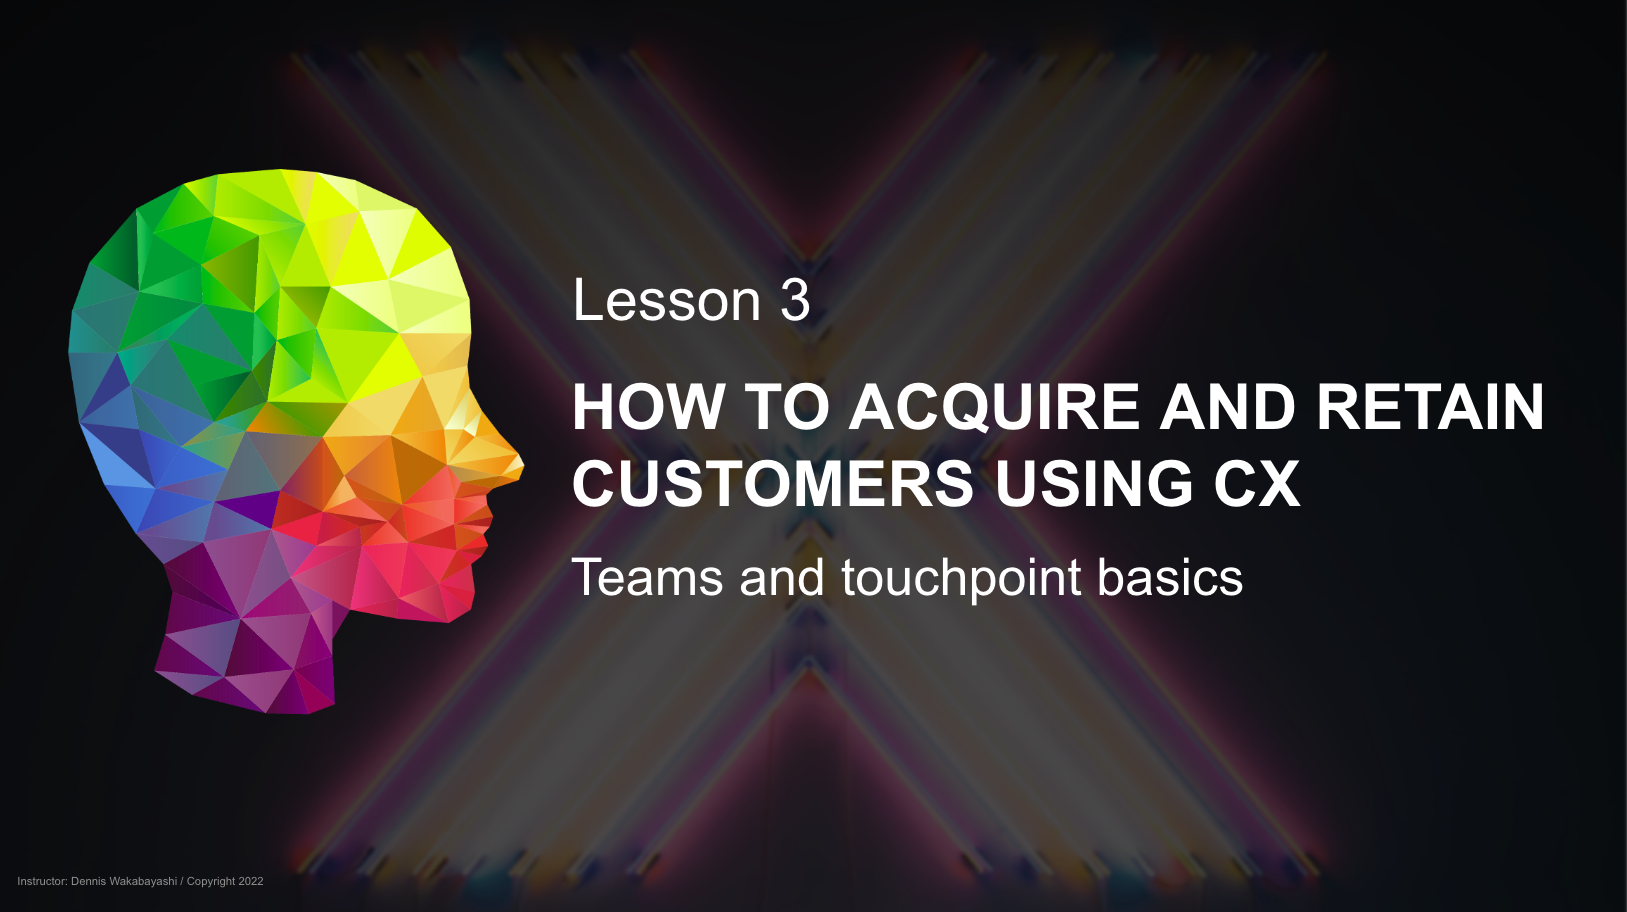 How to acquire and retain customers using CX